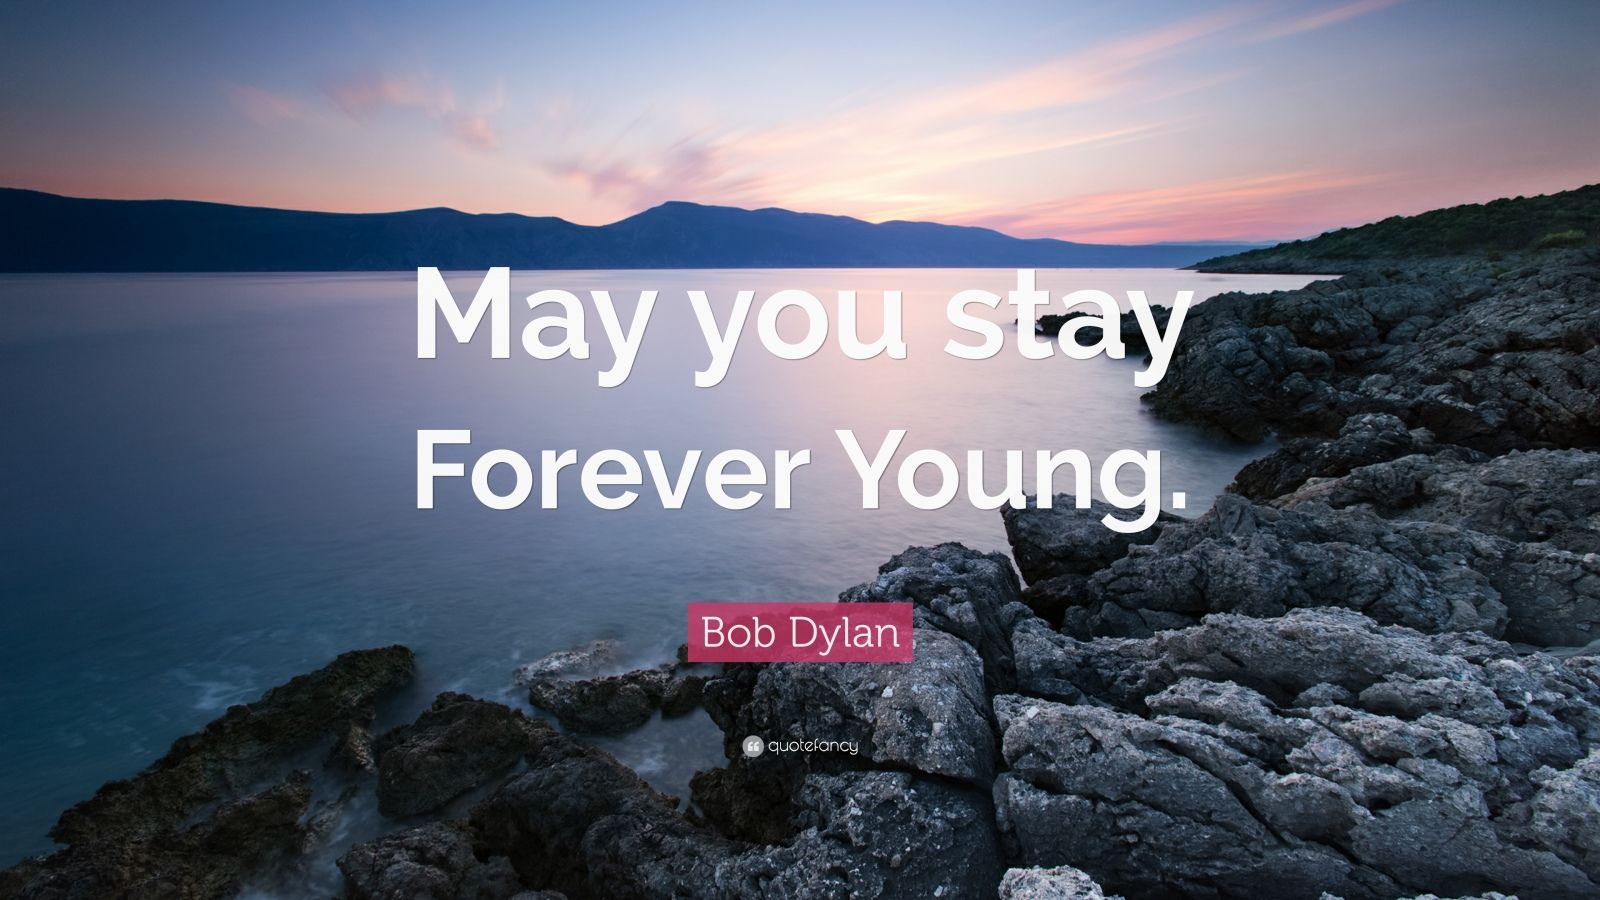 Bob Dylan Quote May you stay Forever Young 